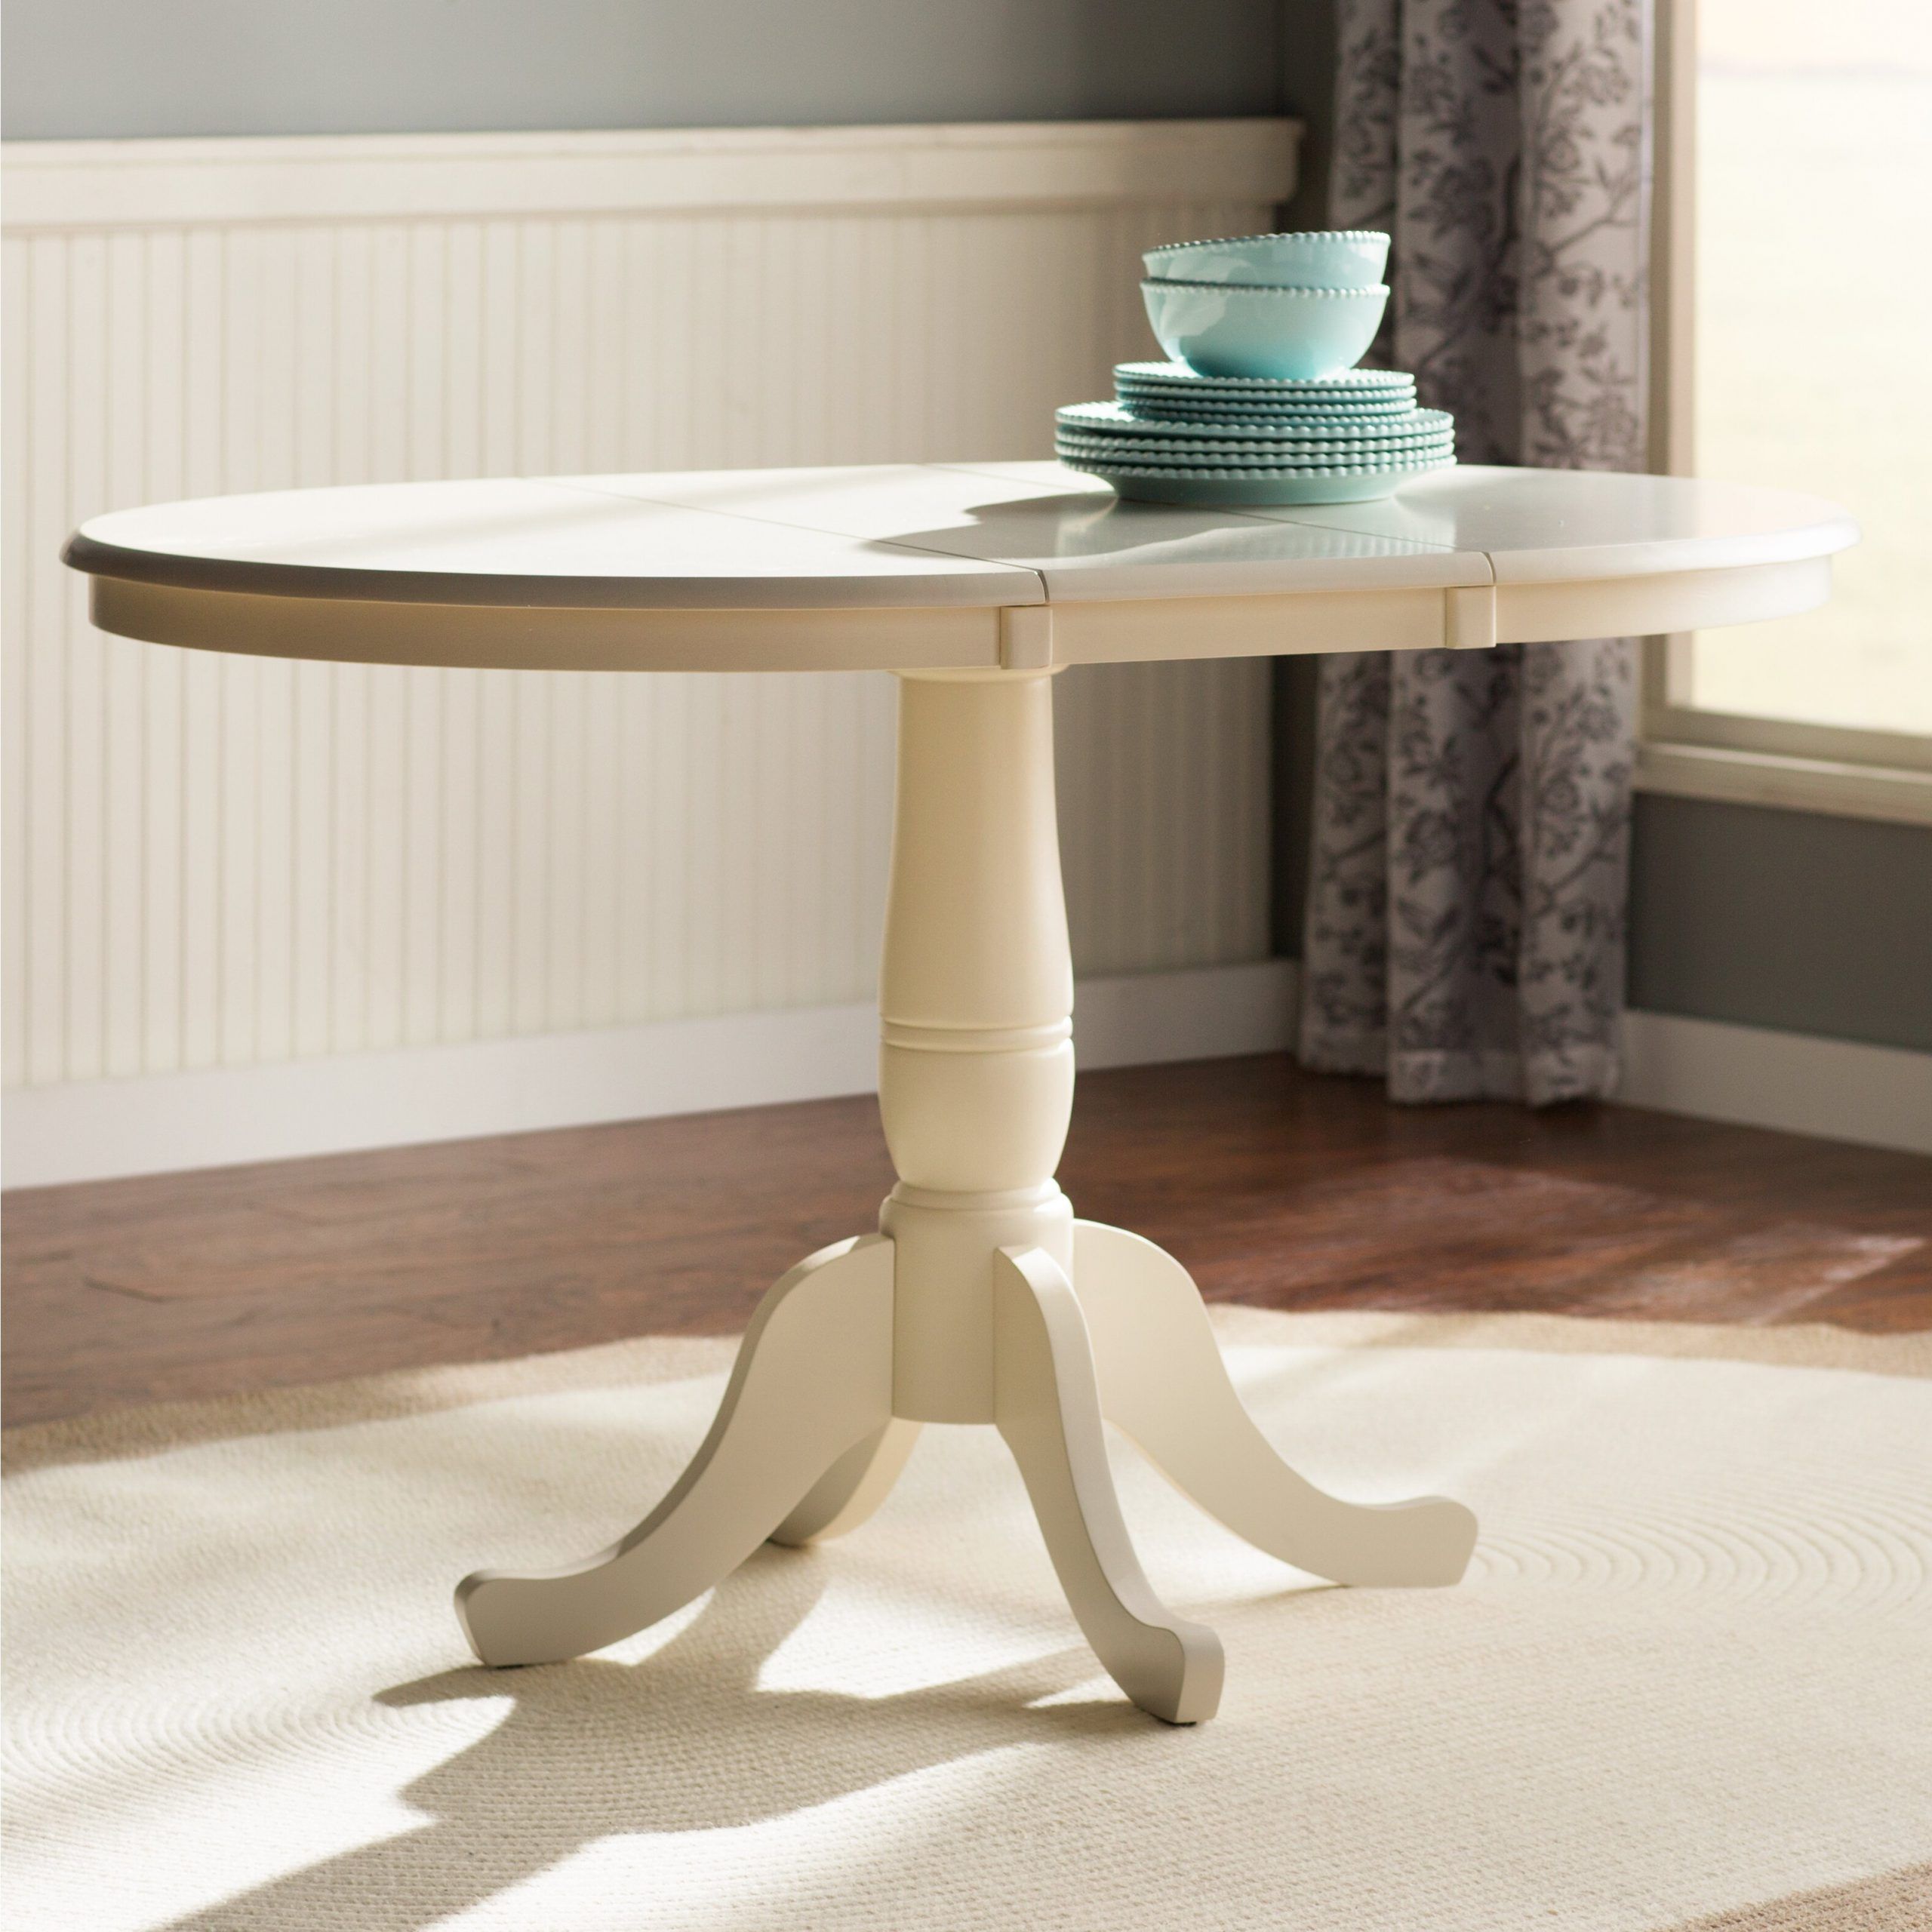 August Grove 36" Extendable Round Pedestal Dining Table In 2020 Round Pedestal Dining Tables With One Leaf (View 6 of 20)